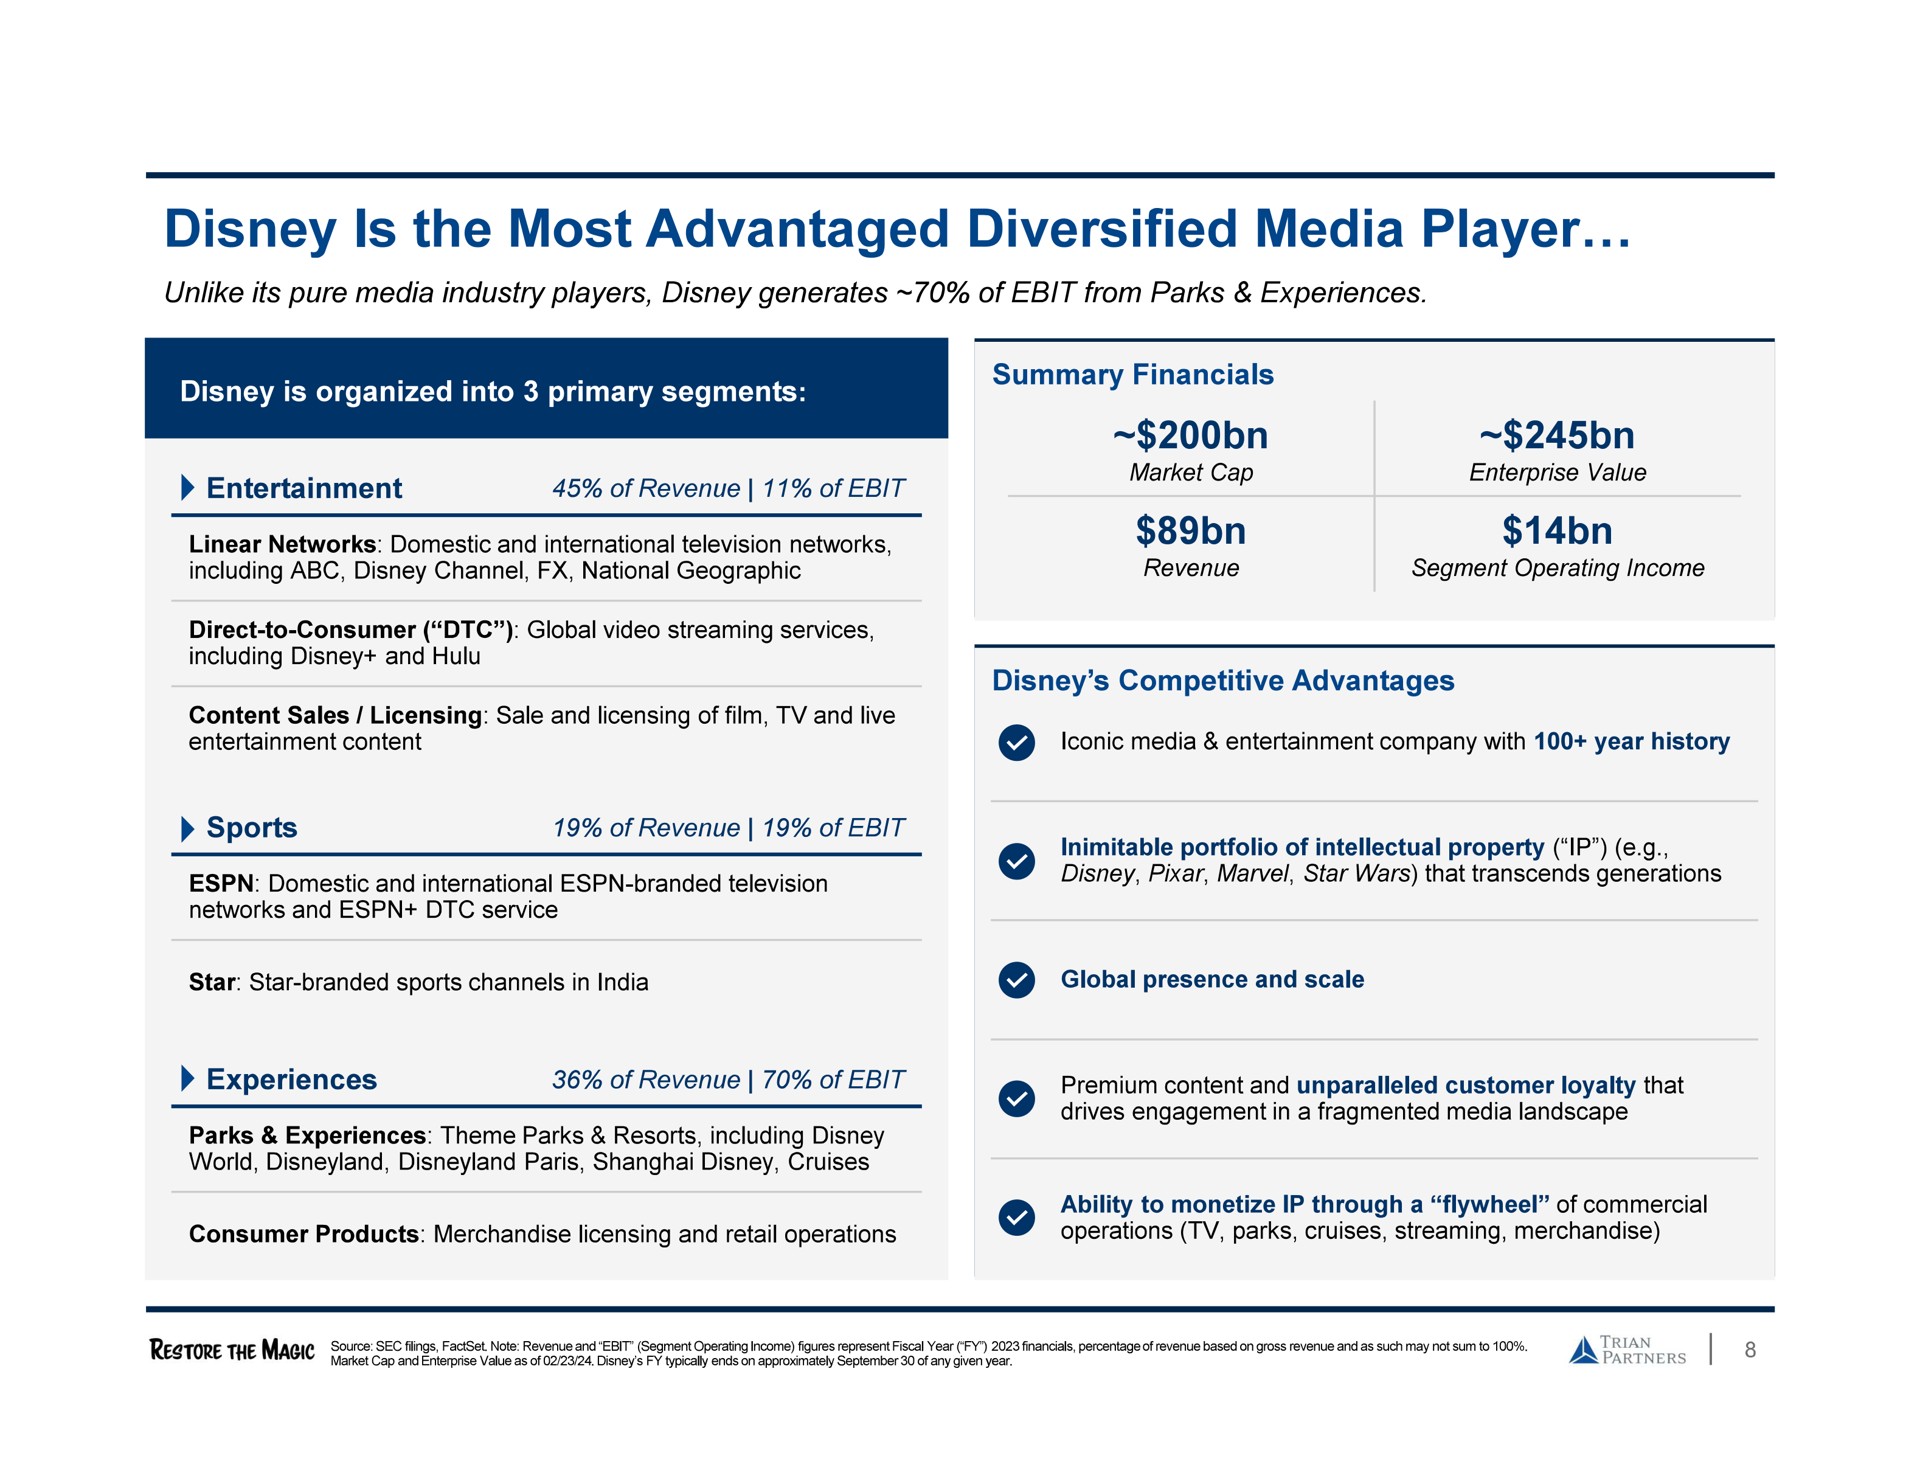 is the most advantaged diversified media player | Trian Partners